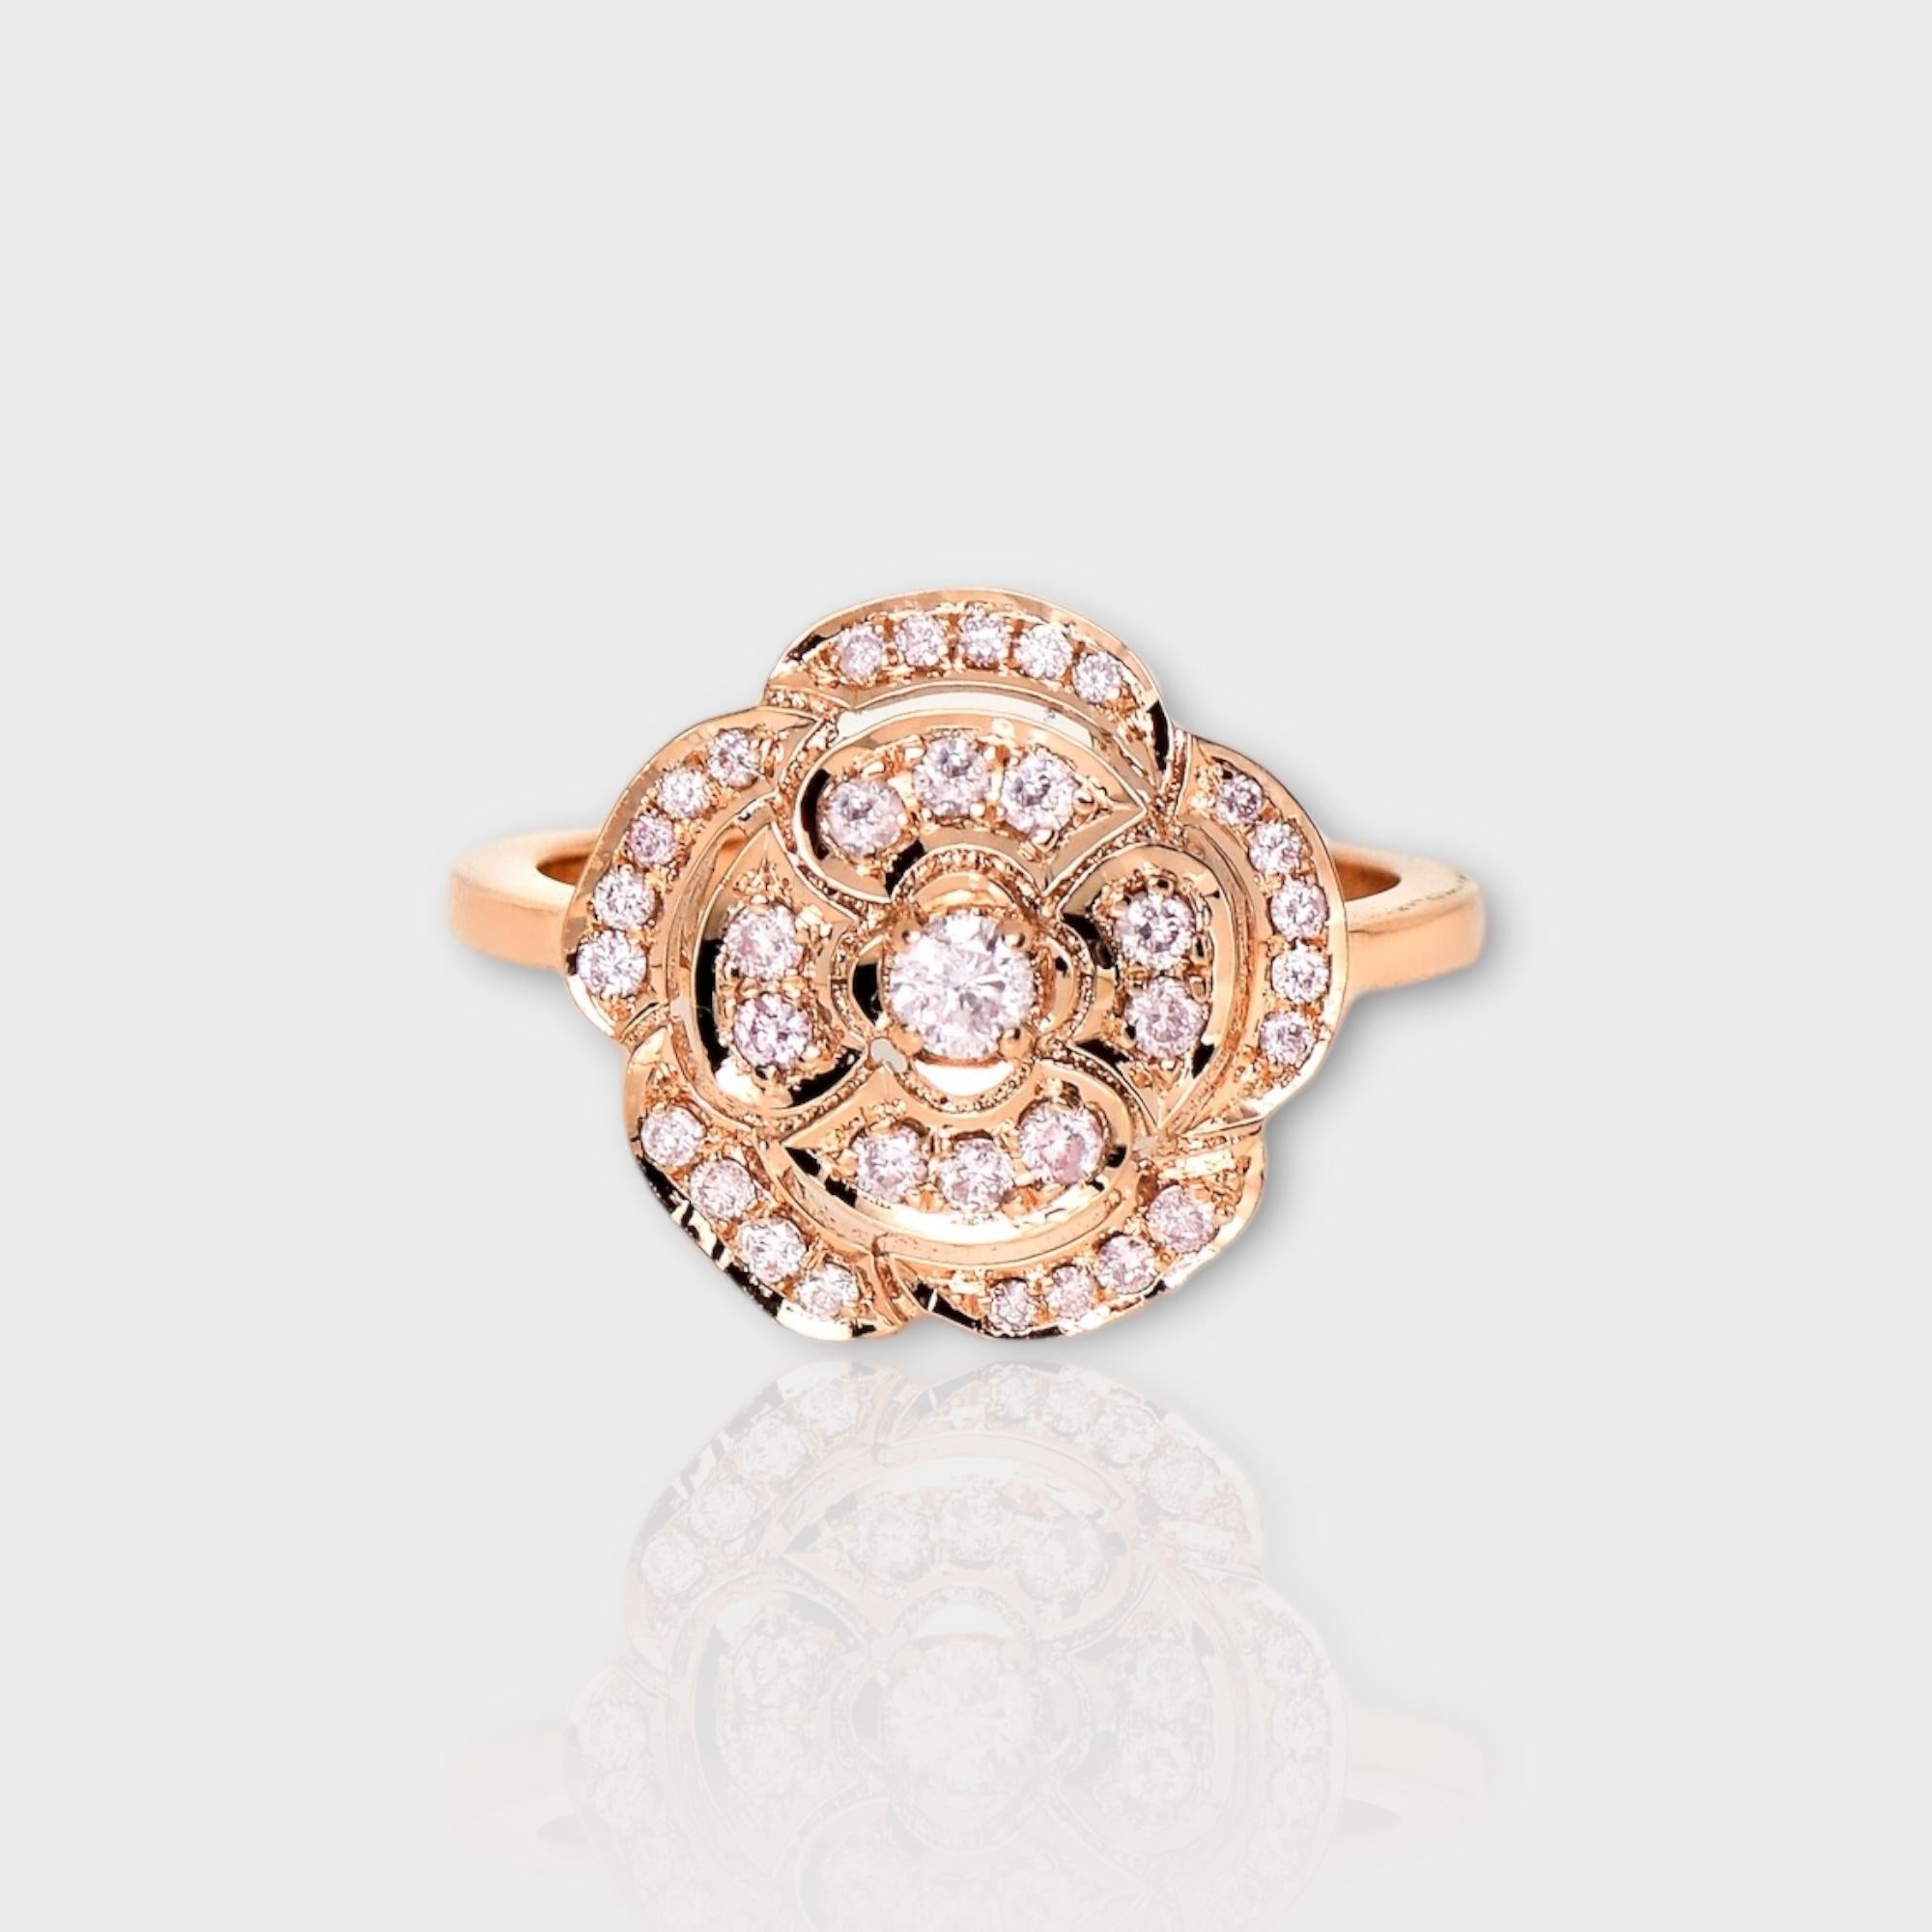 *IGI 14K 0.40 ct Natural Pink Diamonds Rose Design  Antique Art Deco Ring*

This band features a stunning design with a rose crafted from 14K rose gold. It is set with natural pink diamonds weighing 0.40 carats.

This ring features colorful natural